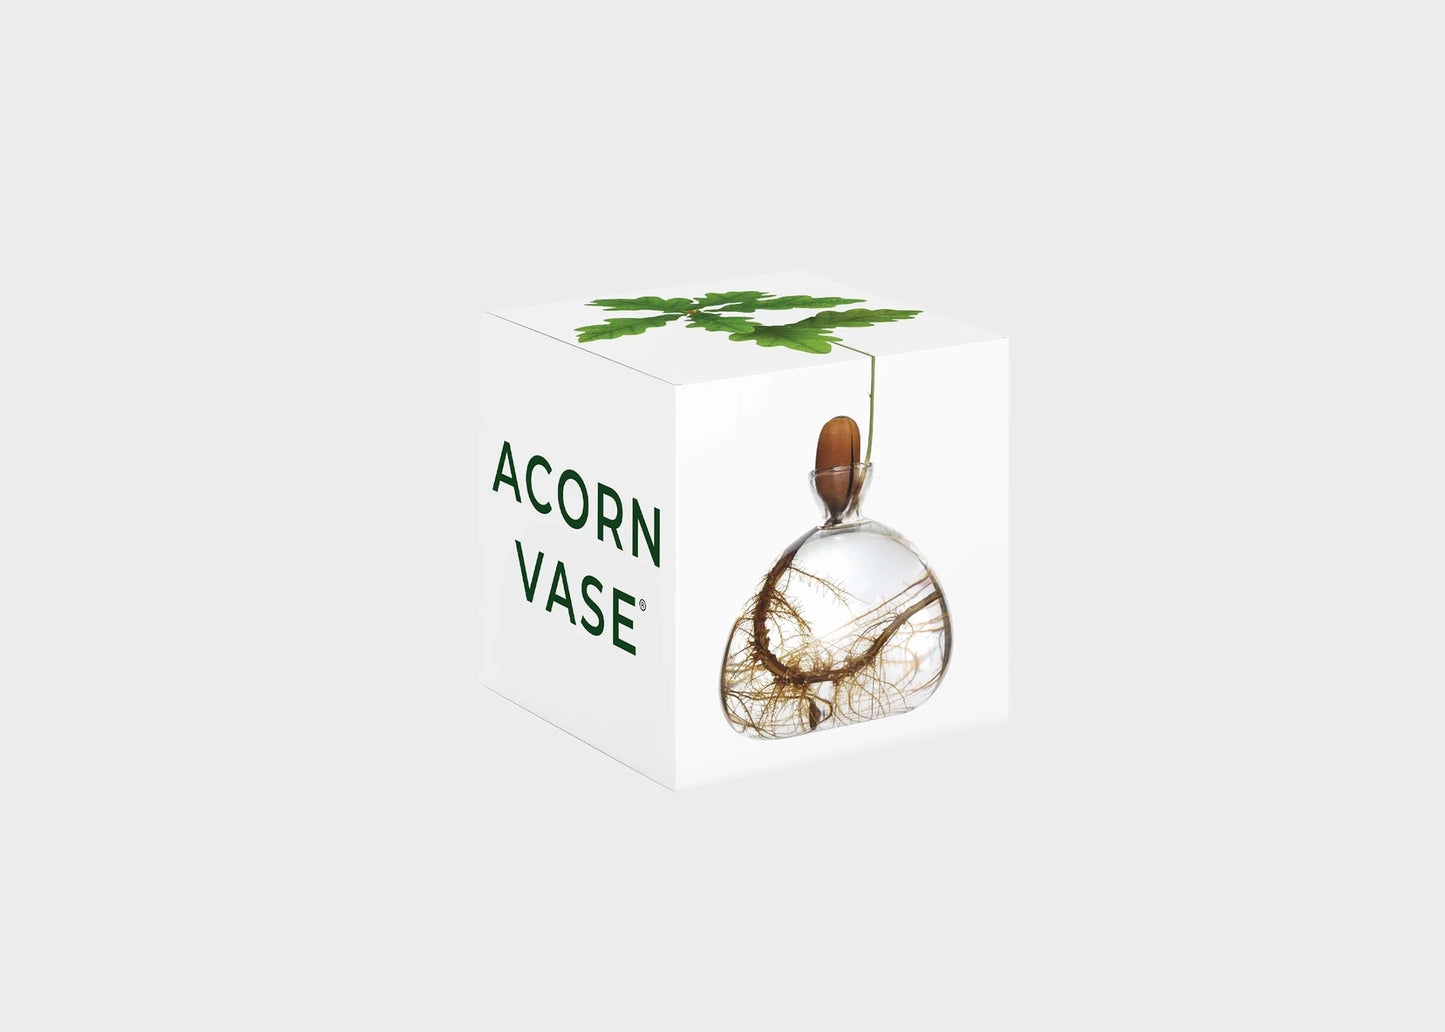 The box for the Acorn Vase